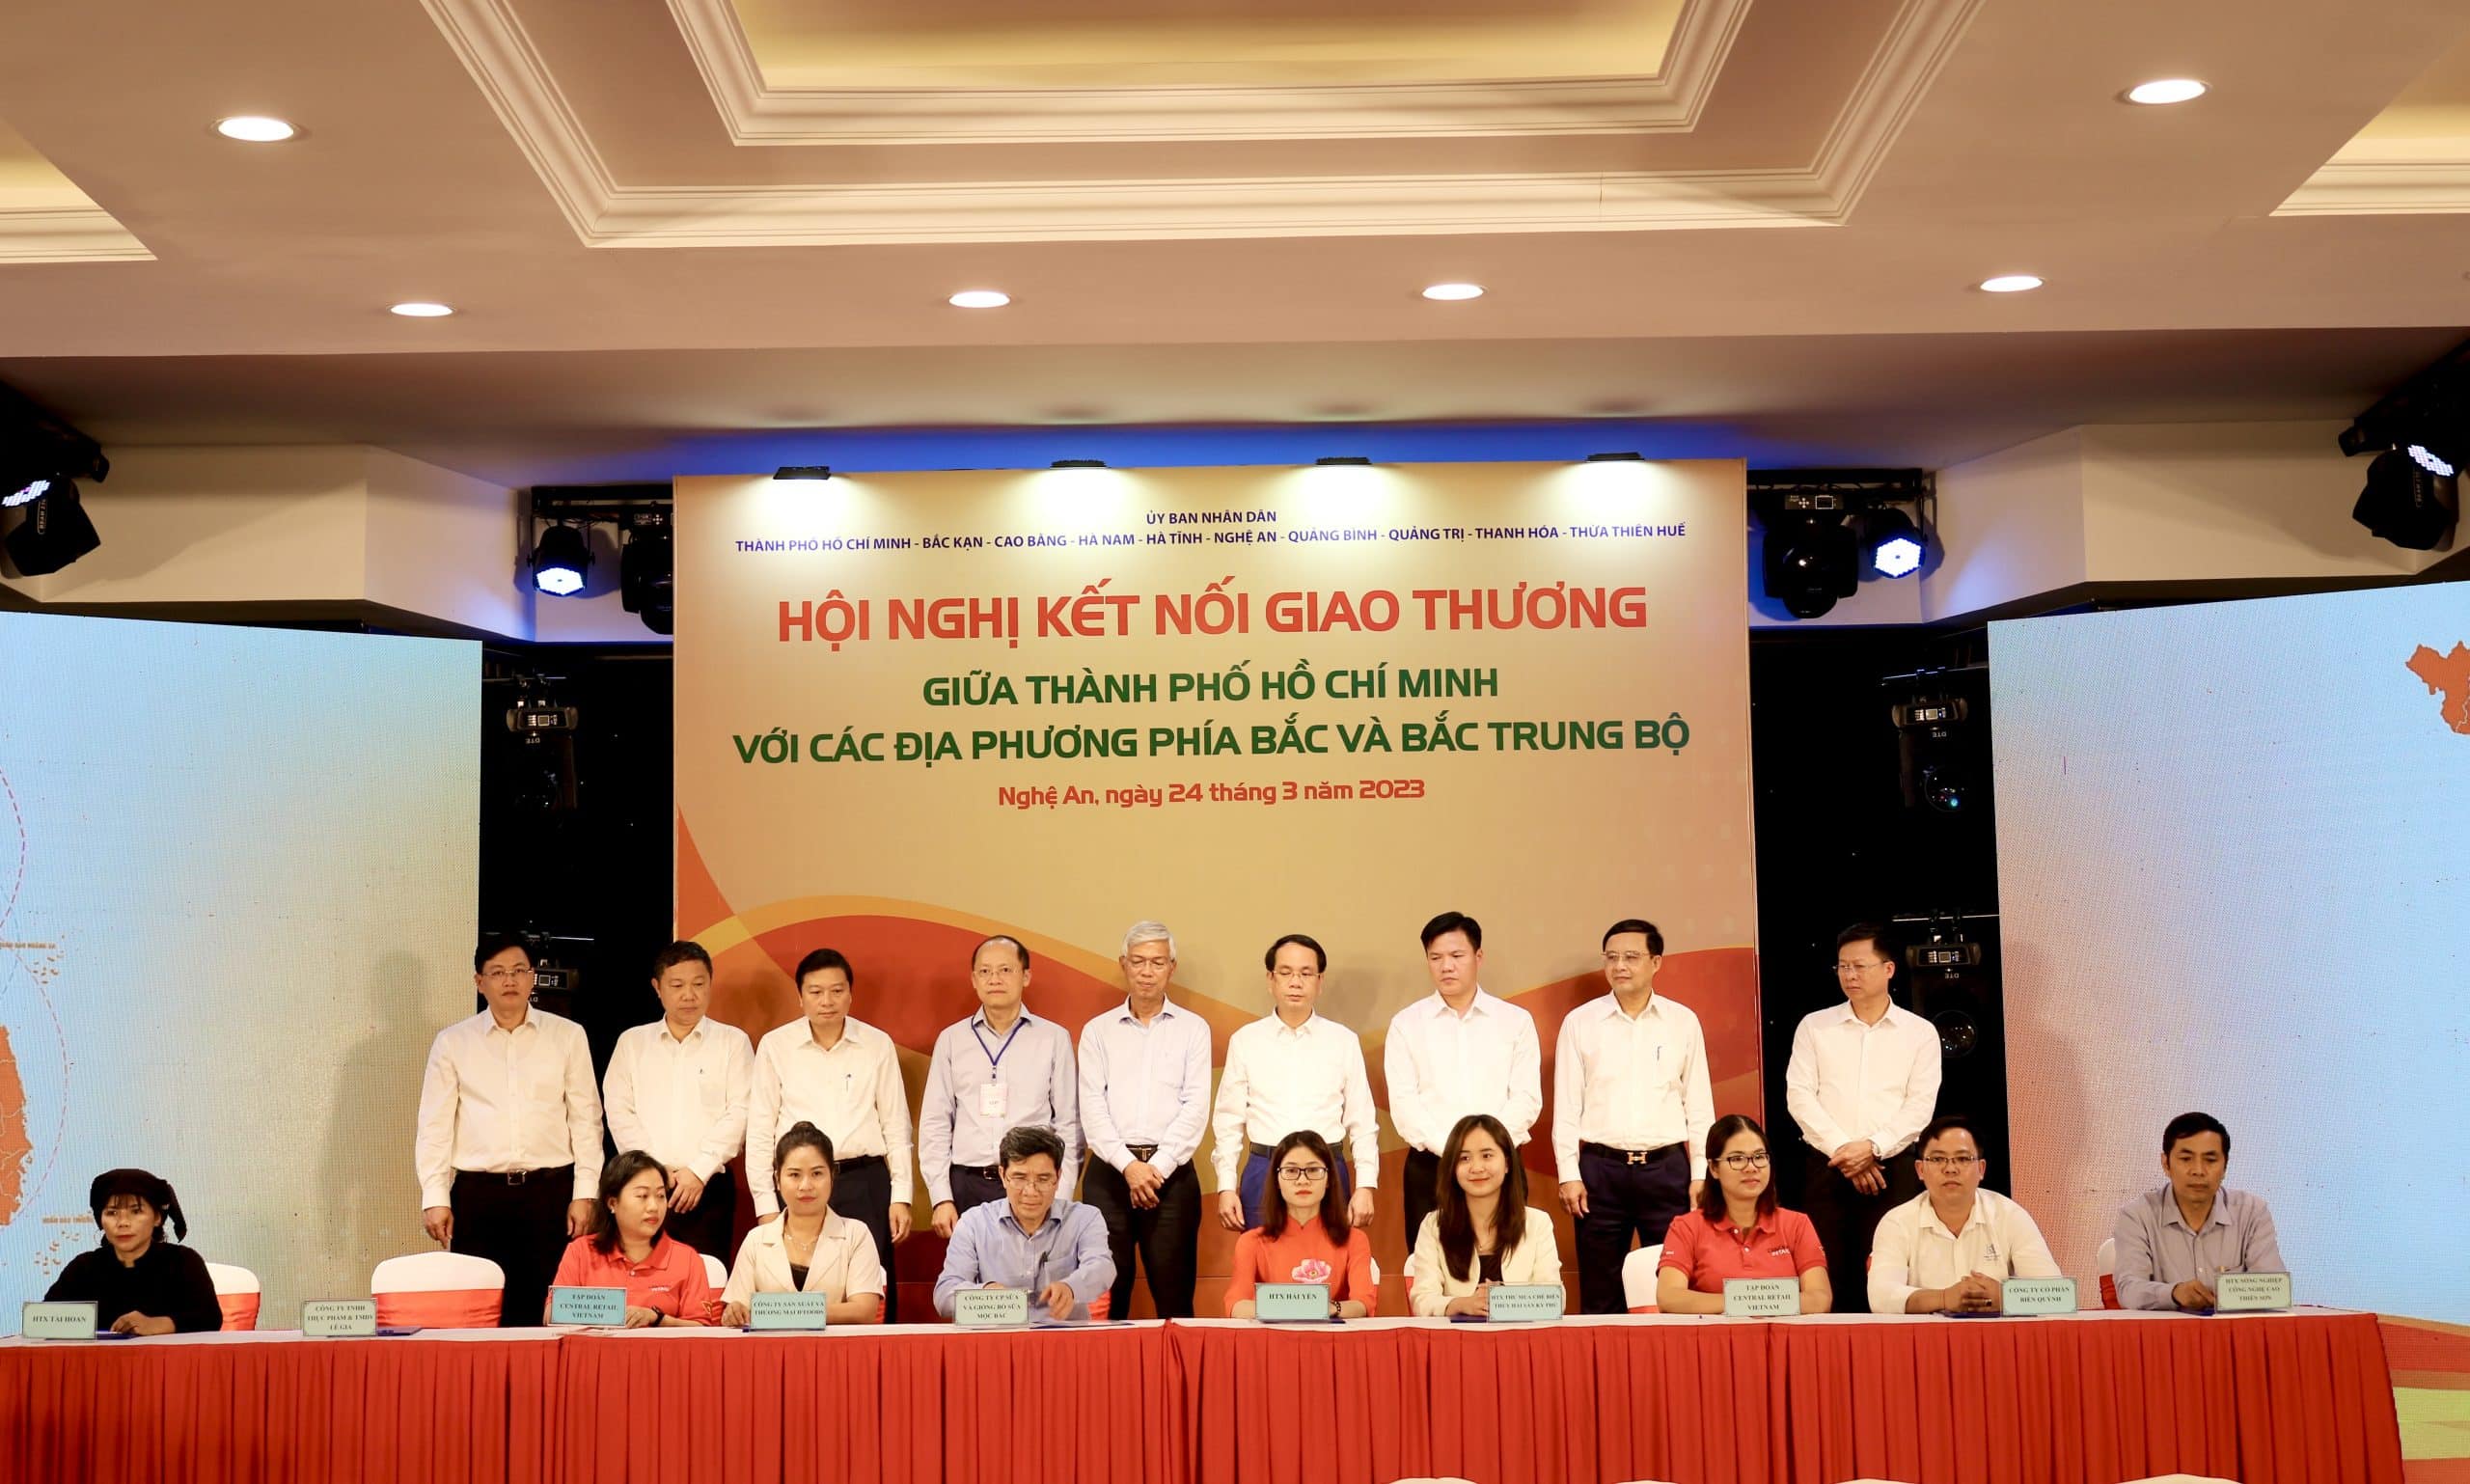 Central Retail Vietnam signs agreements with 8 potential suppliers for FMCG and Fresh products